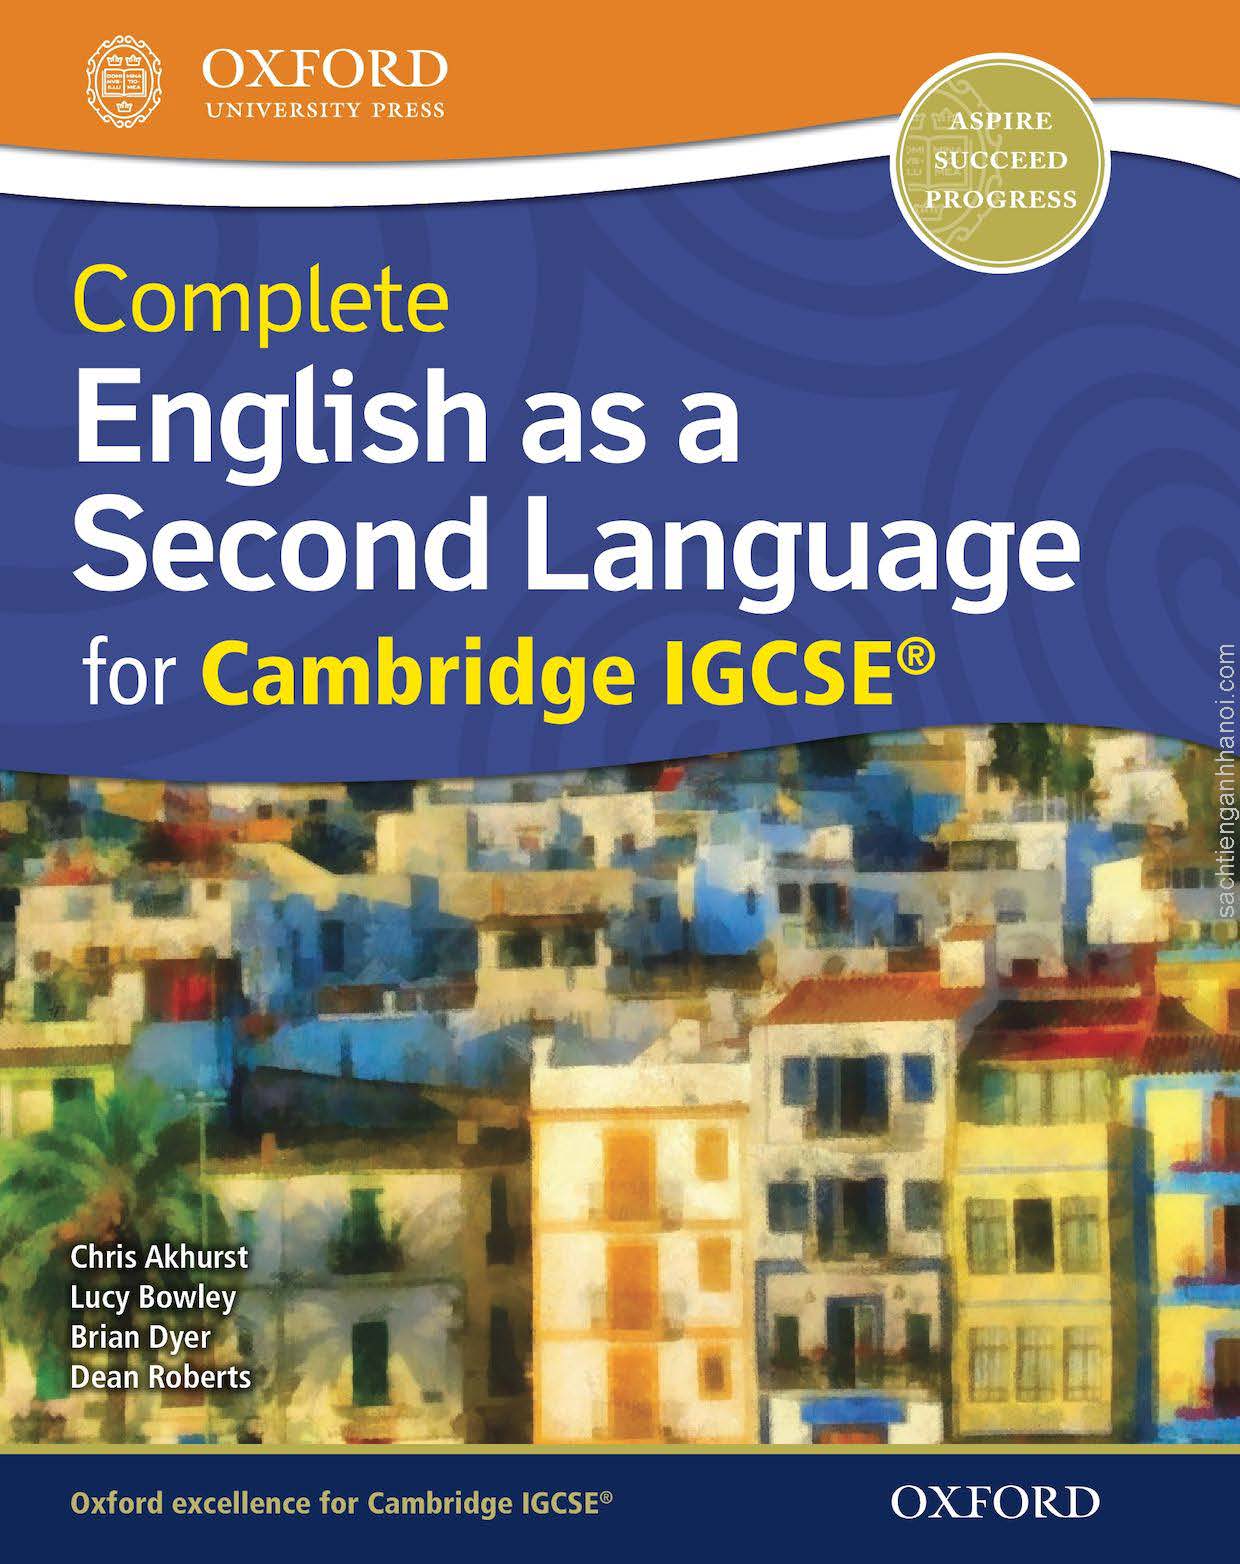 download-pdf-complete-english-as-a-second-language-for-cambridge